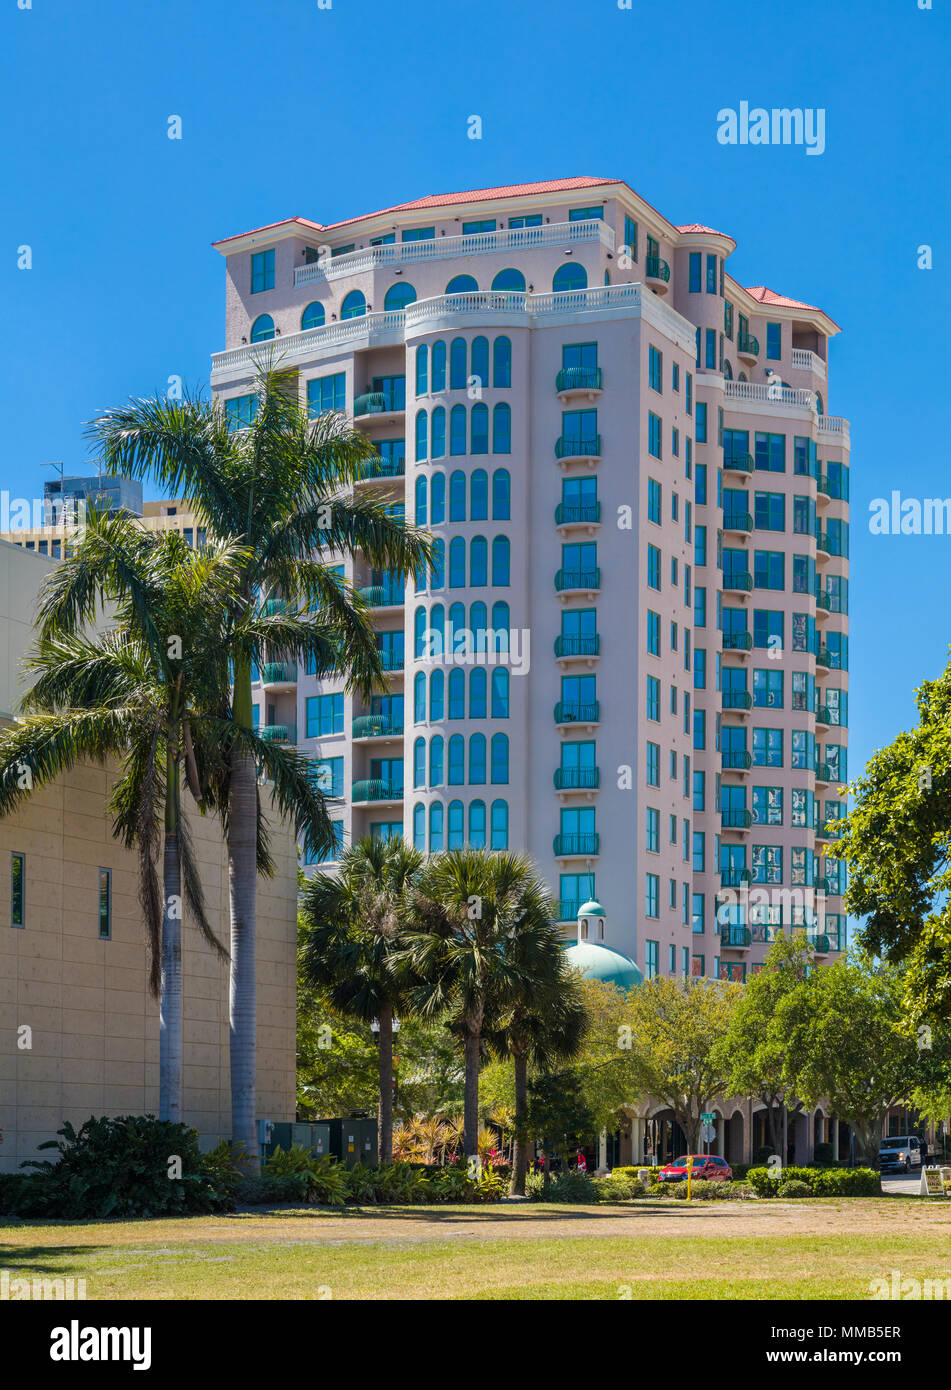 Modern building in St Petersburg FLorida in the United States Stock Photo